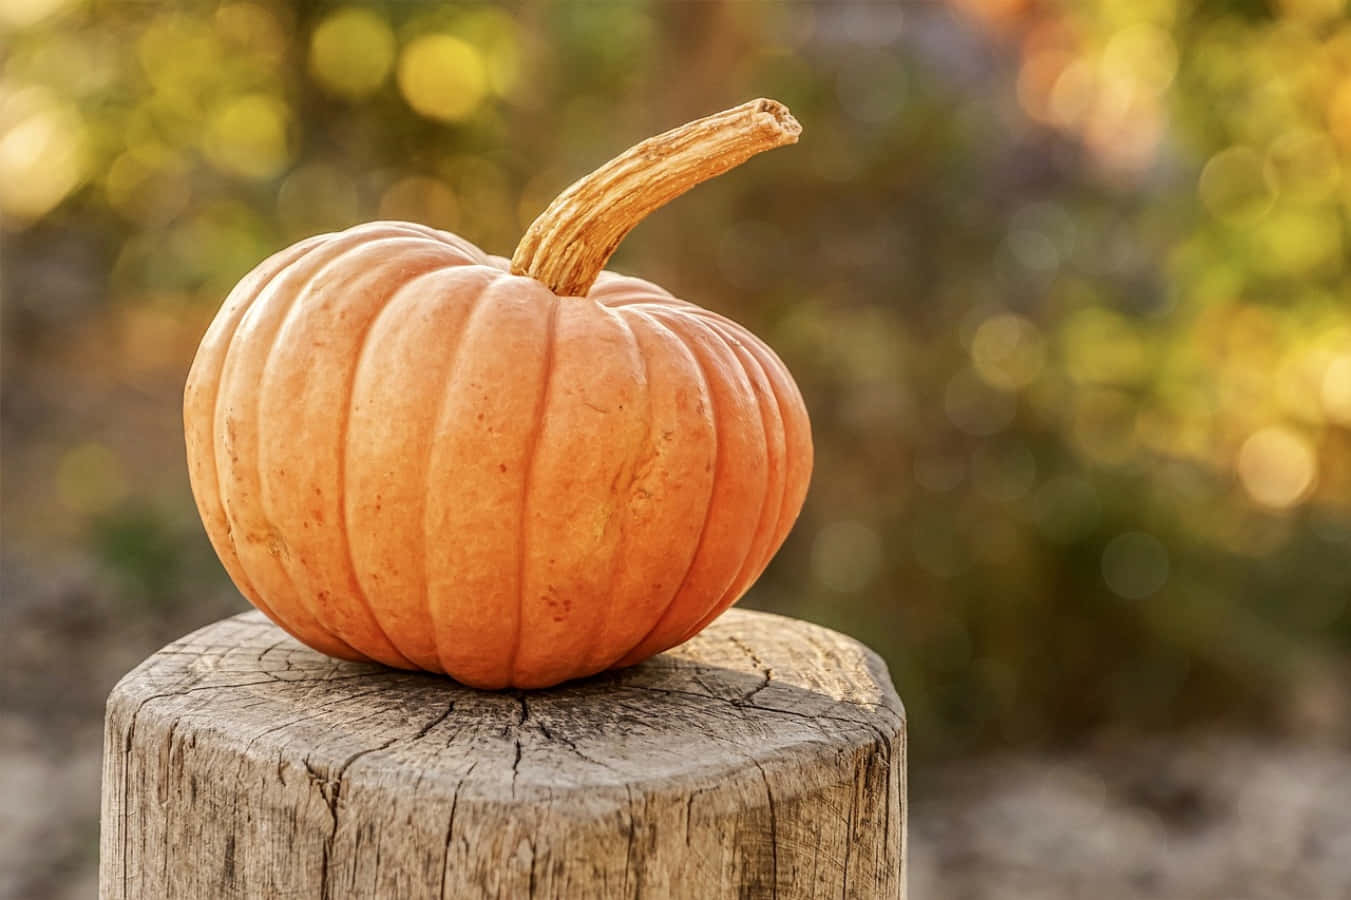 This pumpkin is ready for carving!